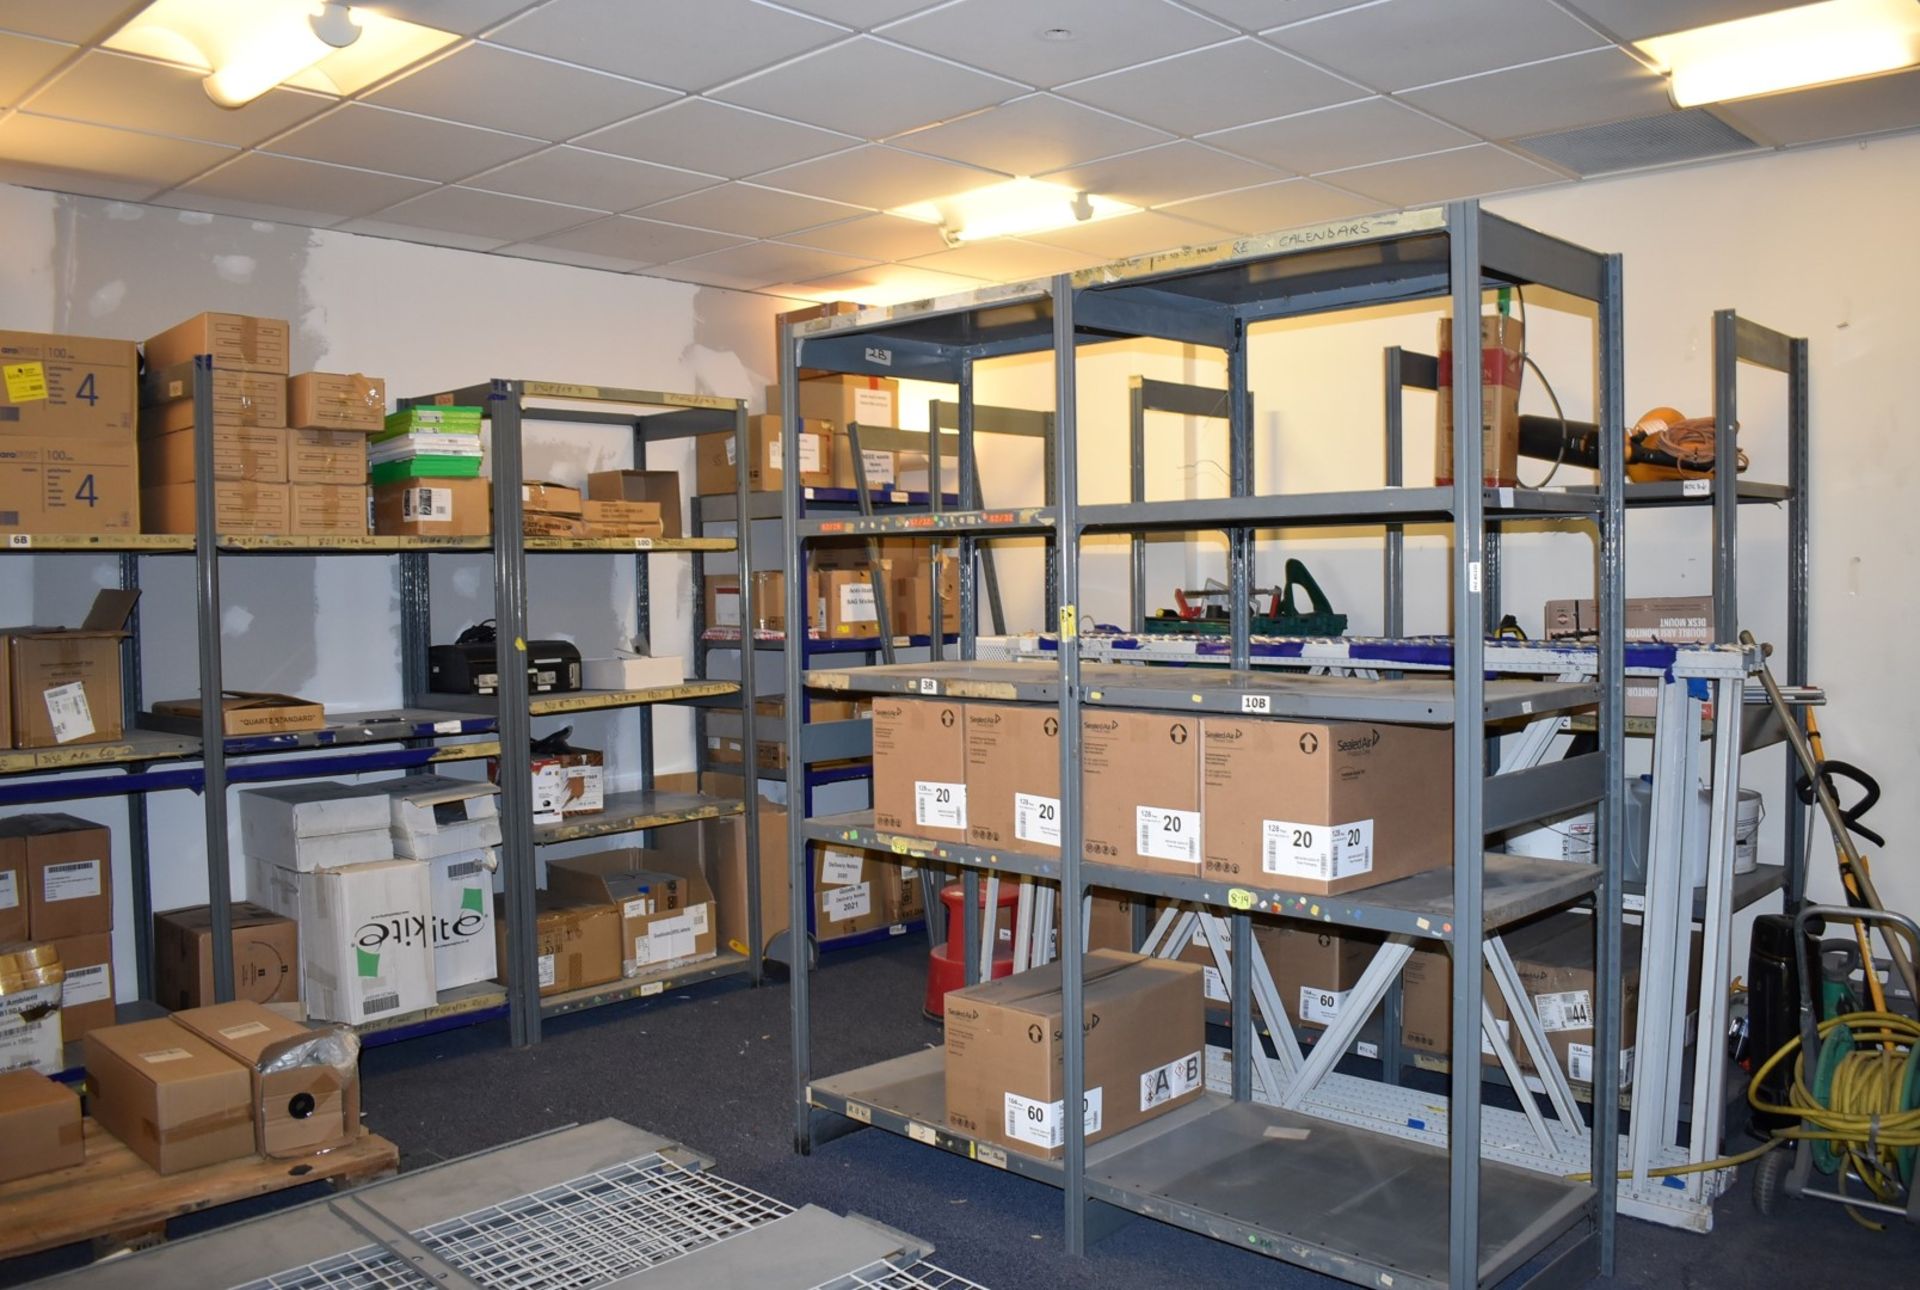 1 x Large Collection of Boltless Warehouse Storage Shelving - Includes 15 x Uprights & 37 x Shelves - Image 2 of 8